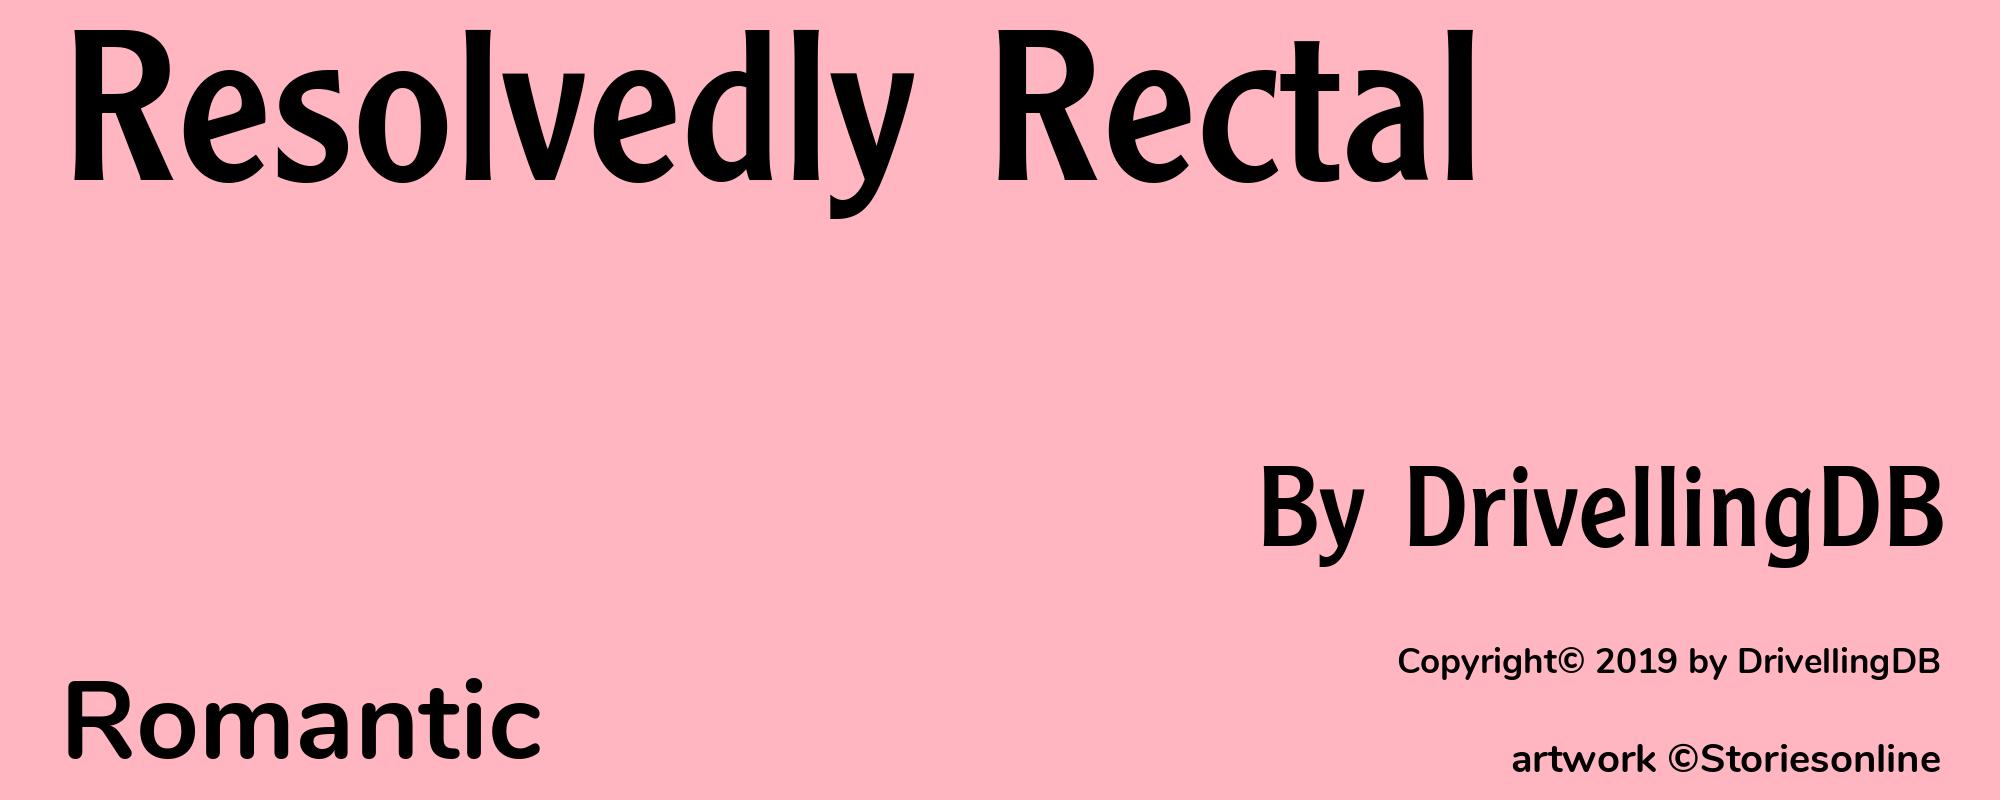 Resolvedly Rectal - Cover